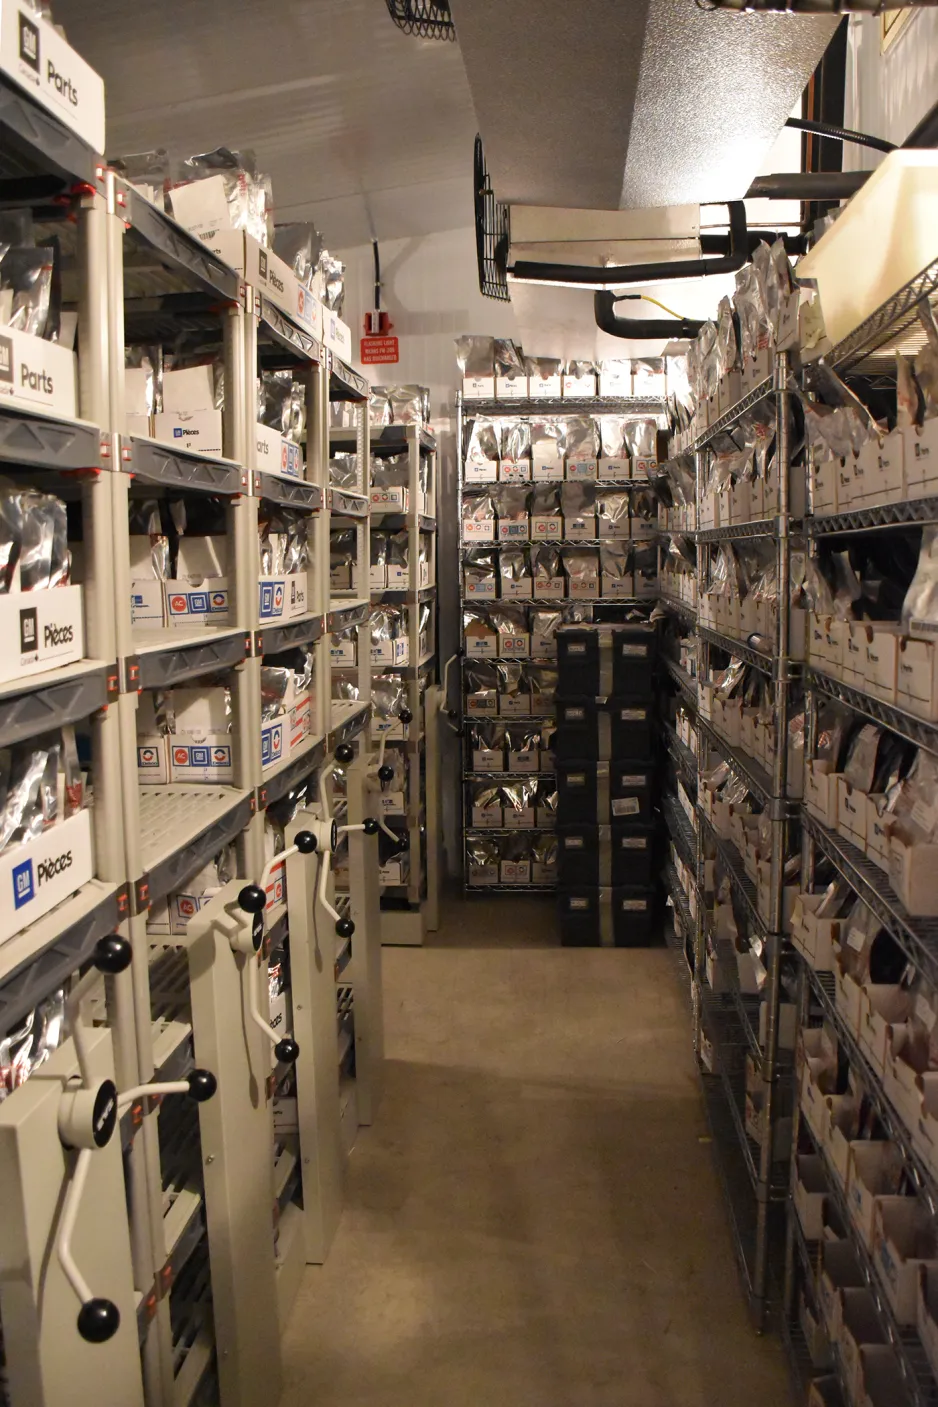 A view down a hallway lined with shelves. The shelves hold rows of boxes, filled with shiny silver pouches.